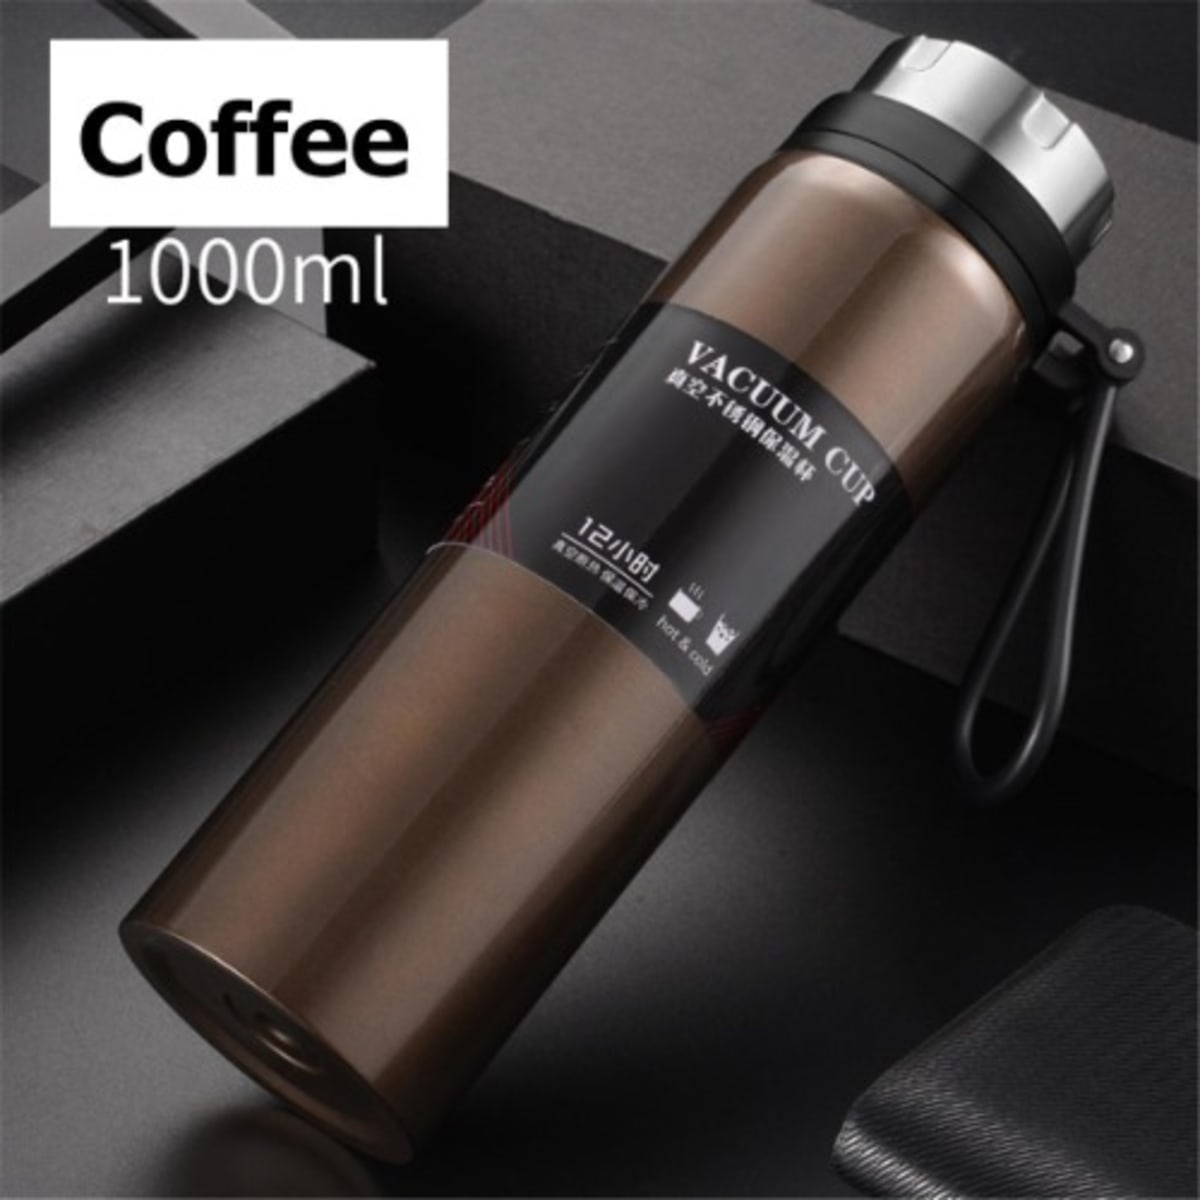 Portable Stainless Steel Bottle Vacuum Cold Thermos Cup Insulated Drink  Flask